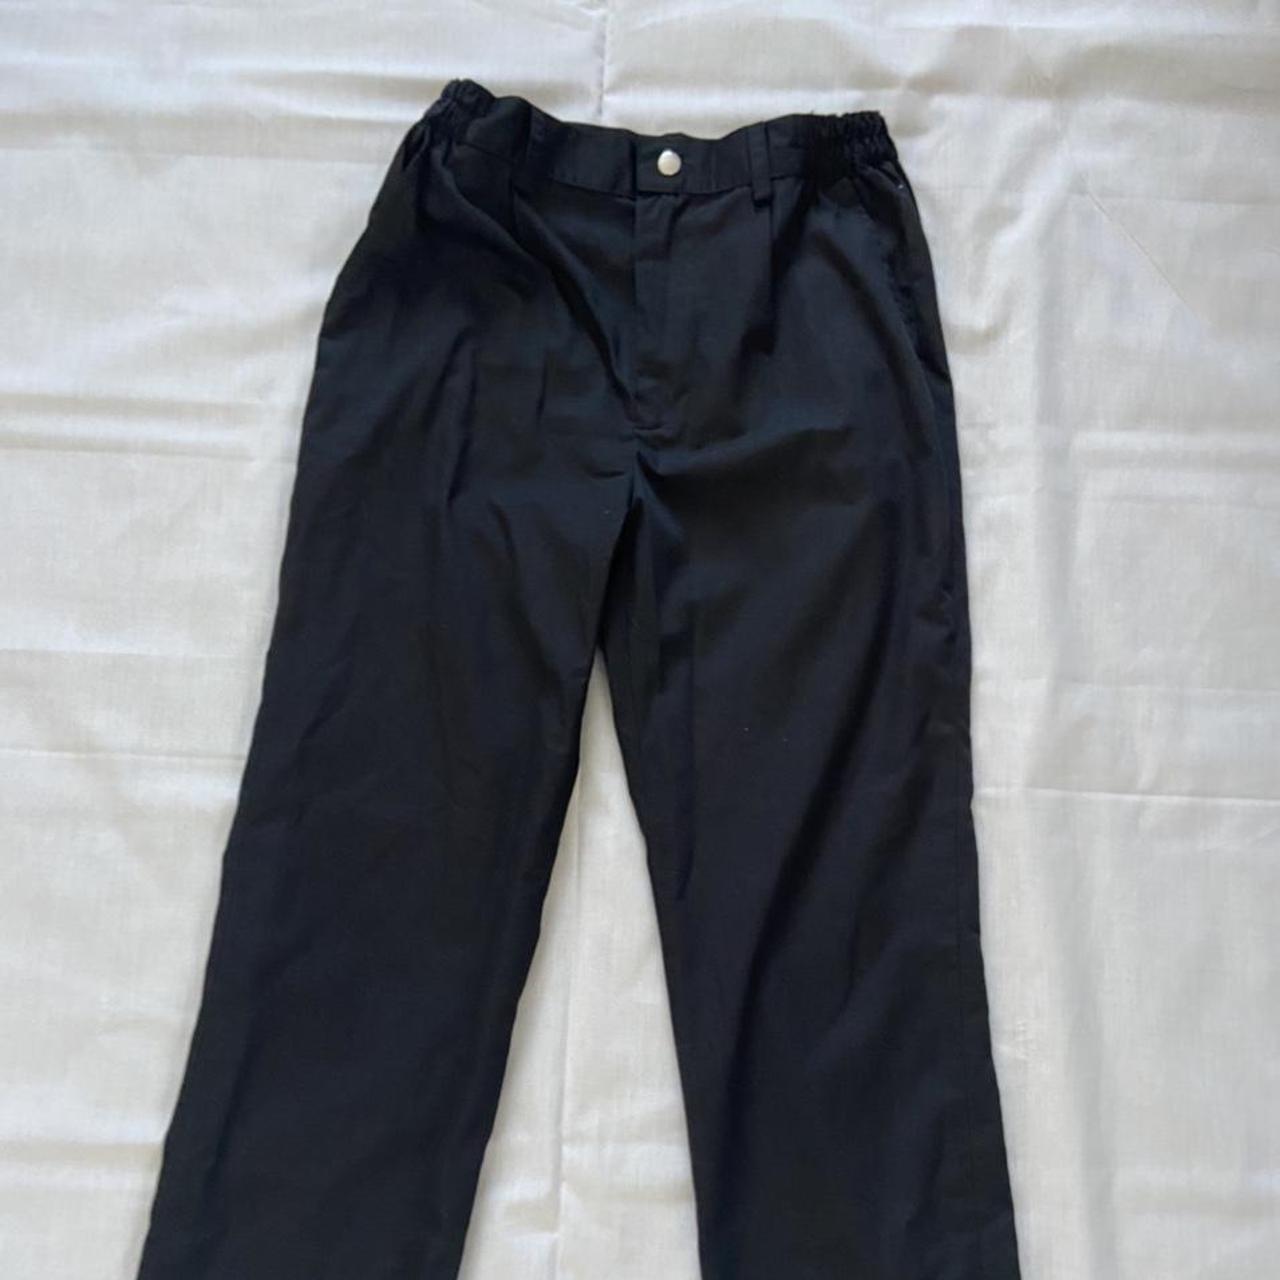 Black vintage pants. They do not have a brand or... - Depop